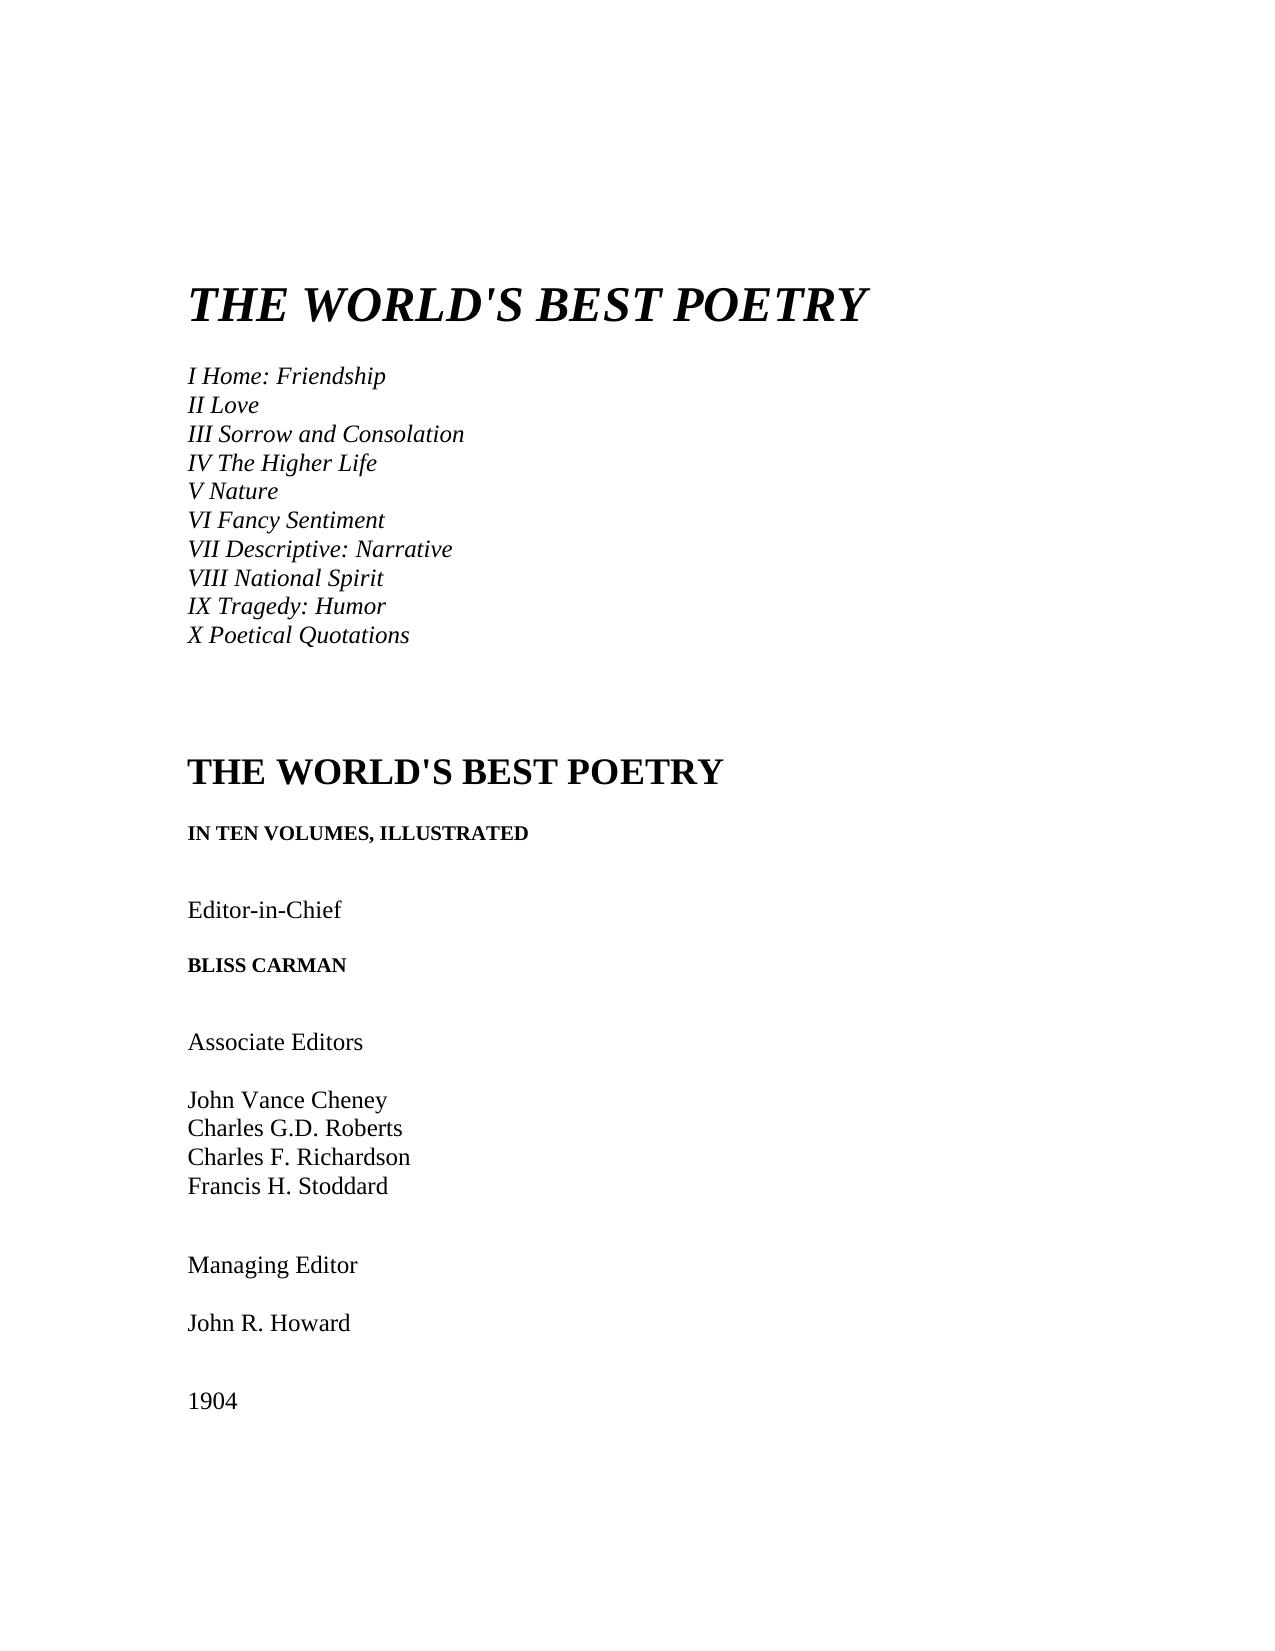 THE WORLD'S BEST POETRY